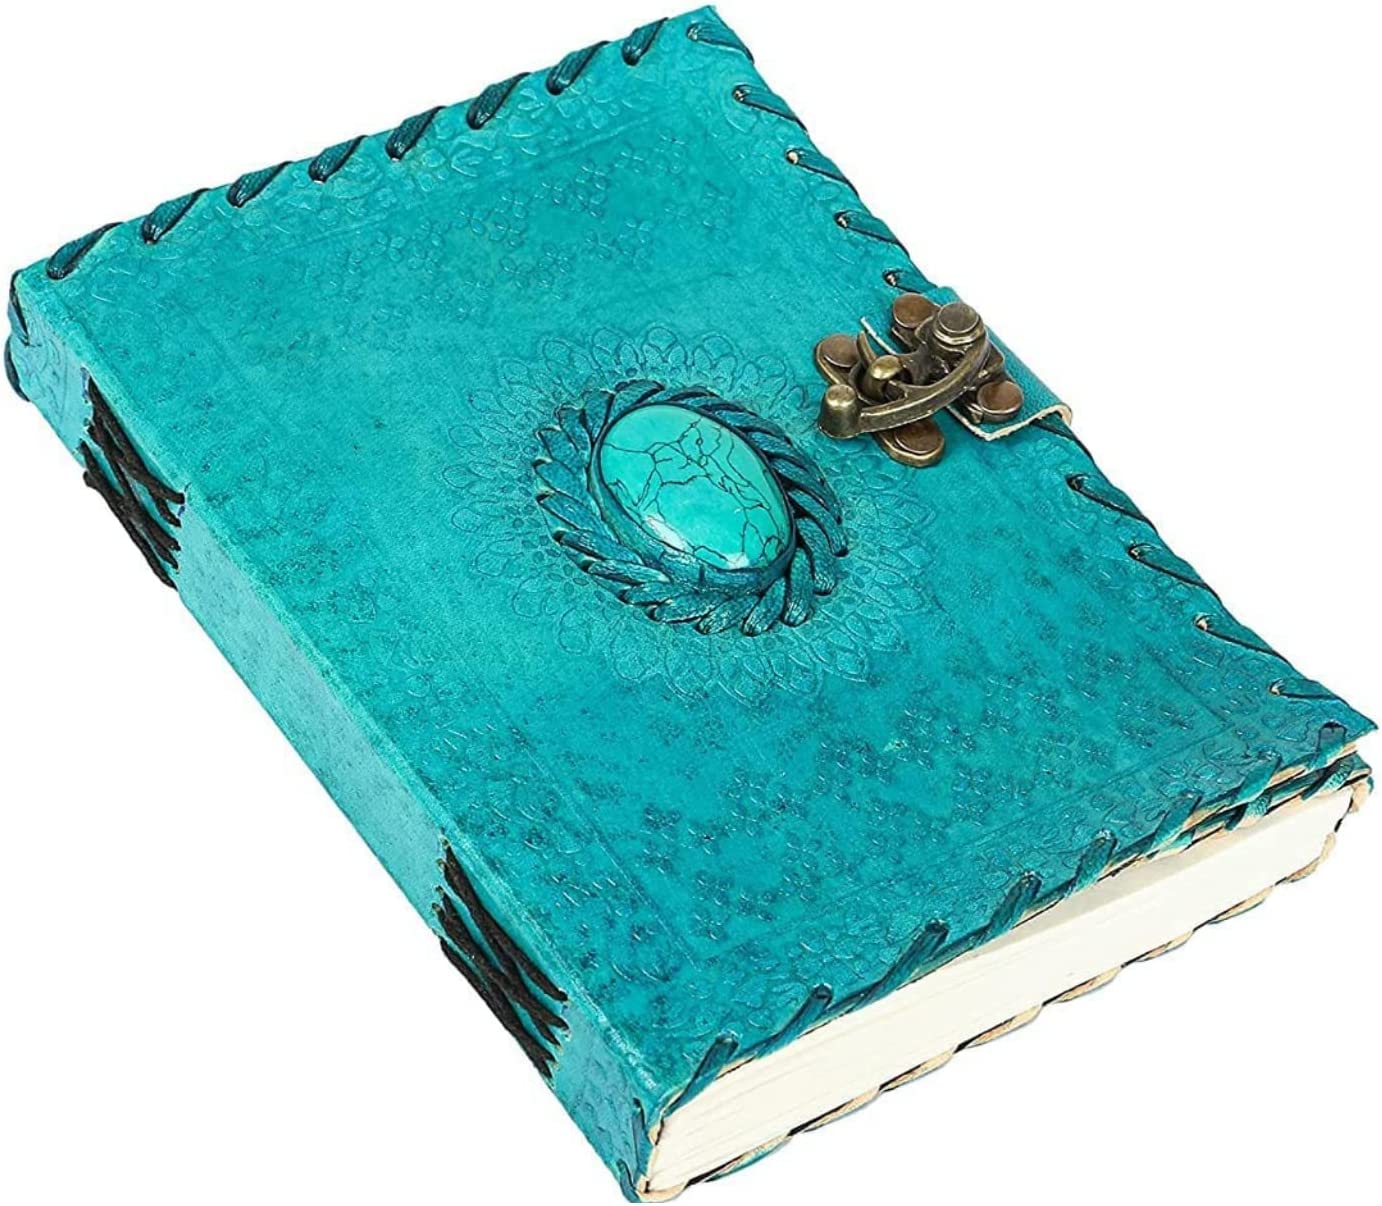 Leather Journals – Blank Spell Book of Shadows Journal with Lock Clasp Prop Vintage Notebook Journal Leather Bound Journal Witchcraft Wiccan Notebook Leather Sketchbook Drawing & Writing Book Diary - image 1 of 5